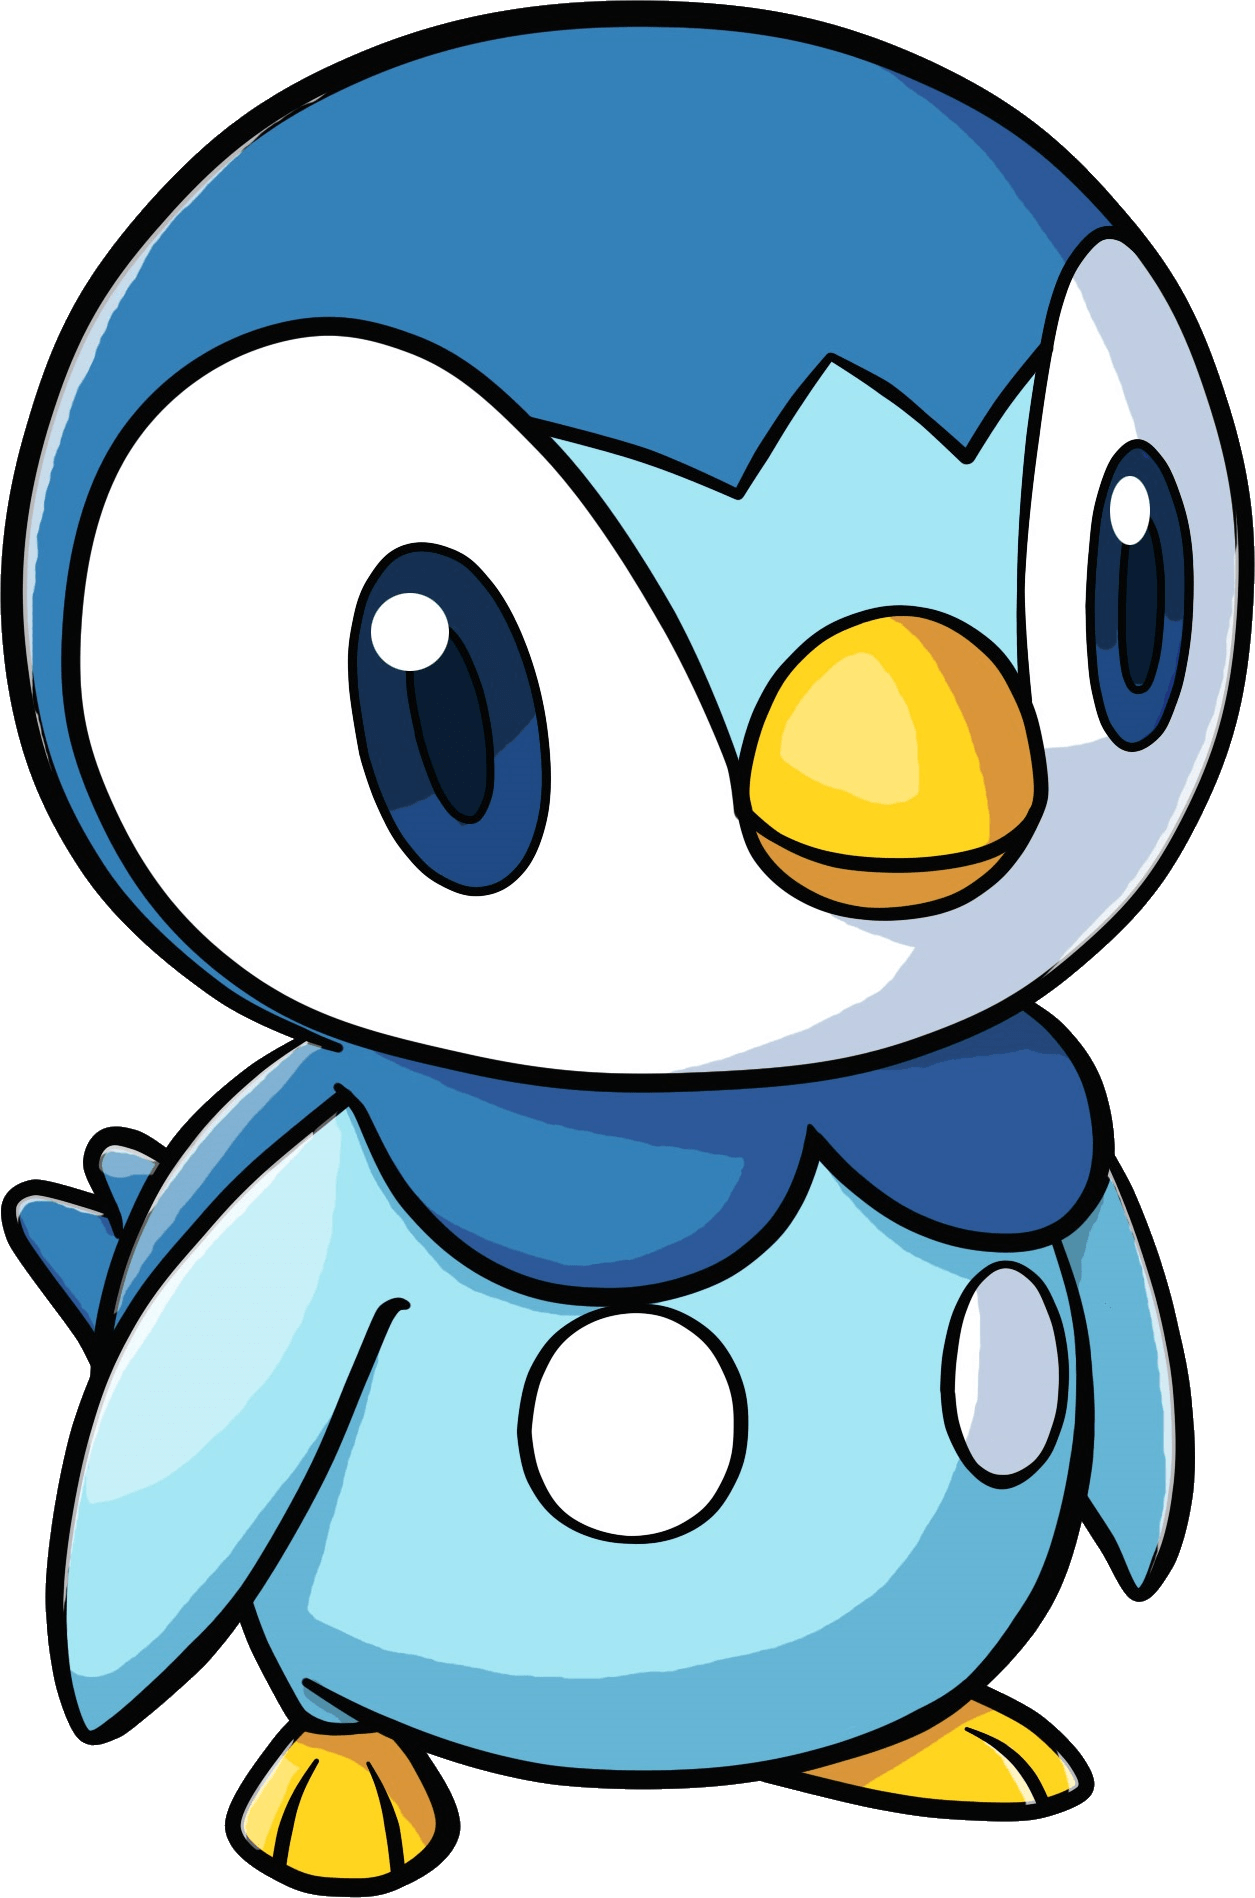 Piplup Pokemon Transparent Png Stickpng